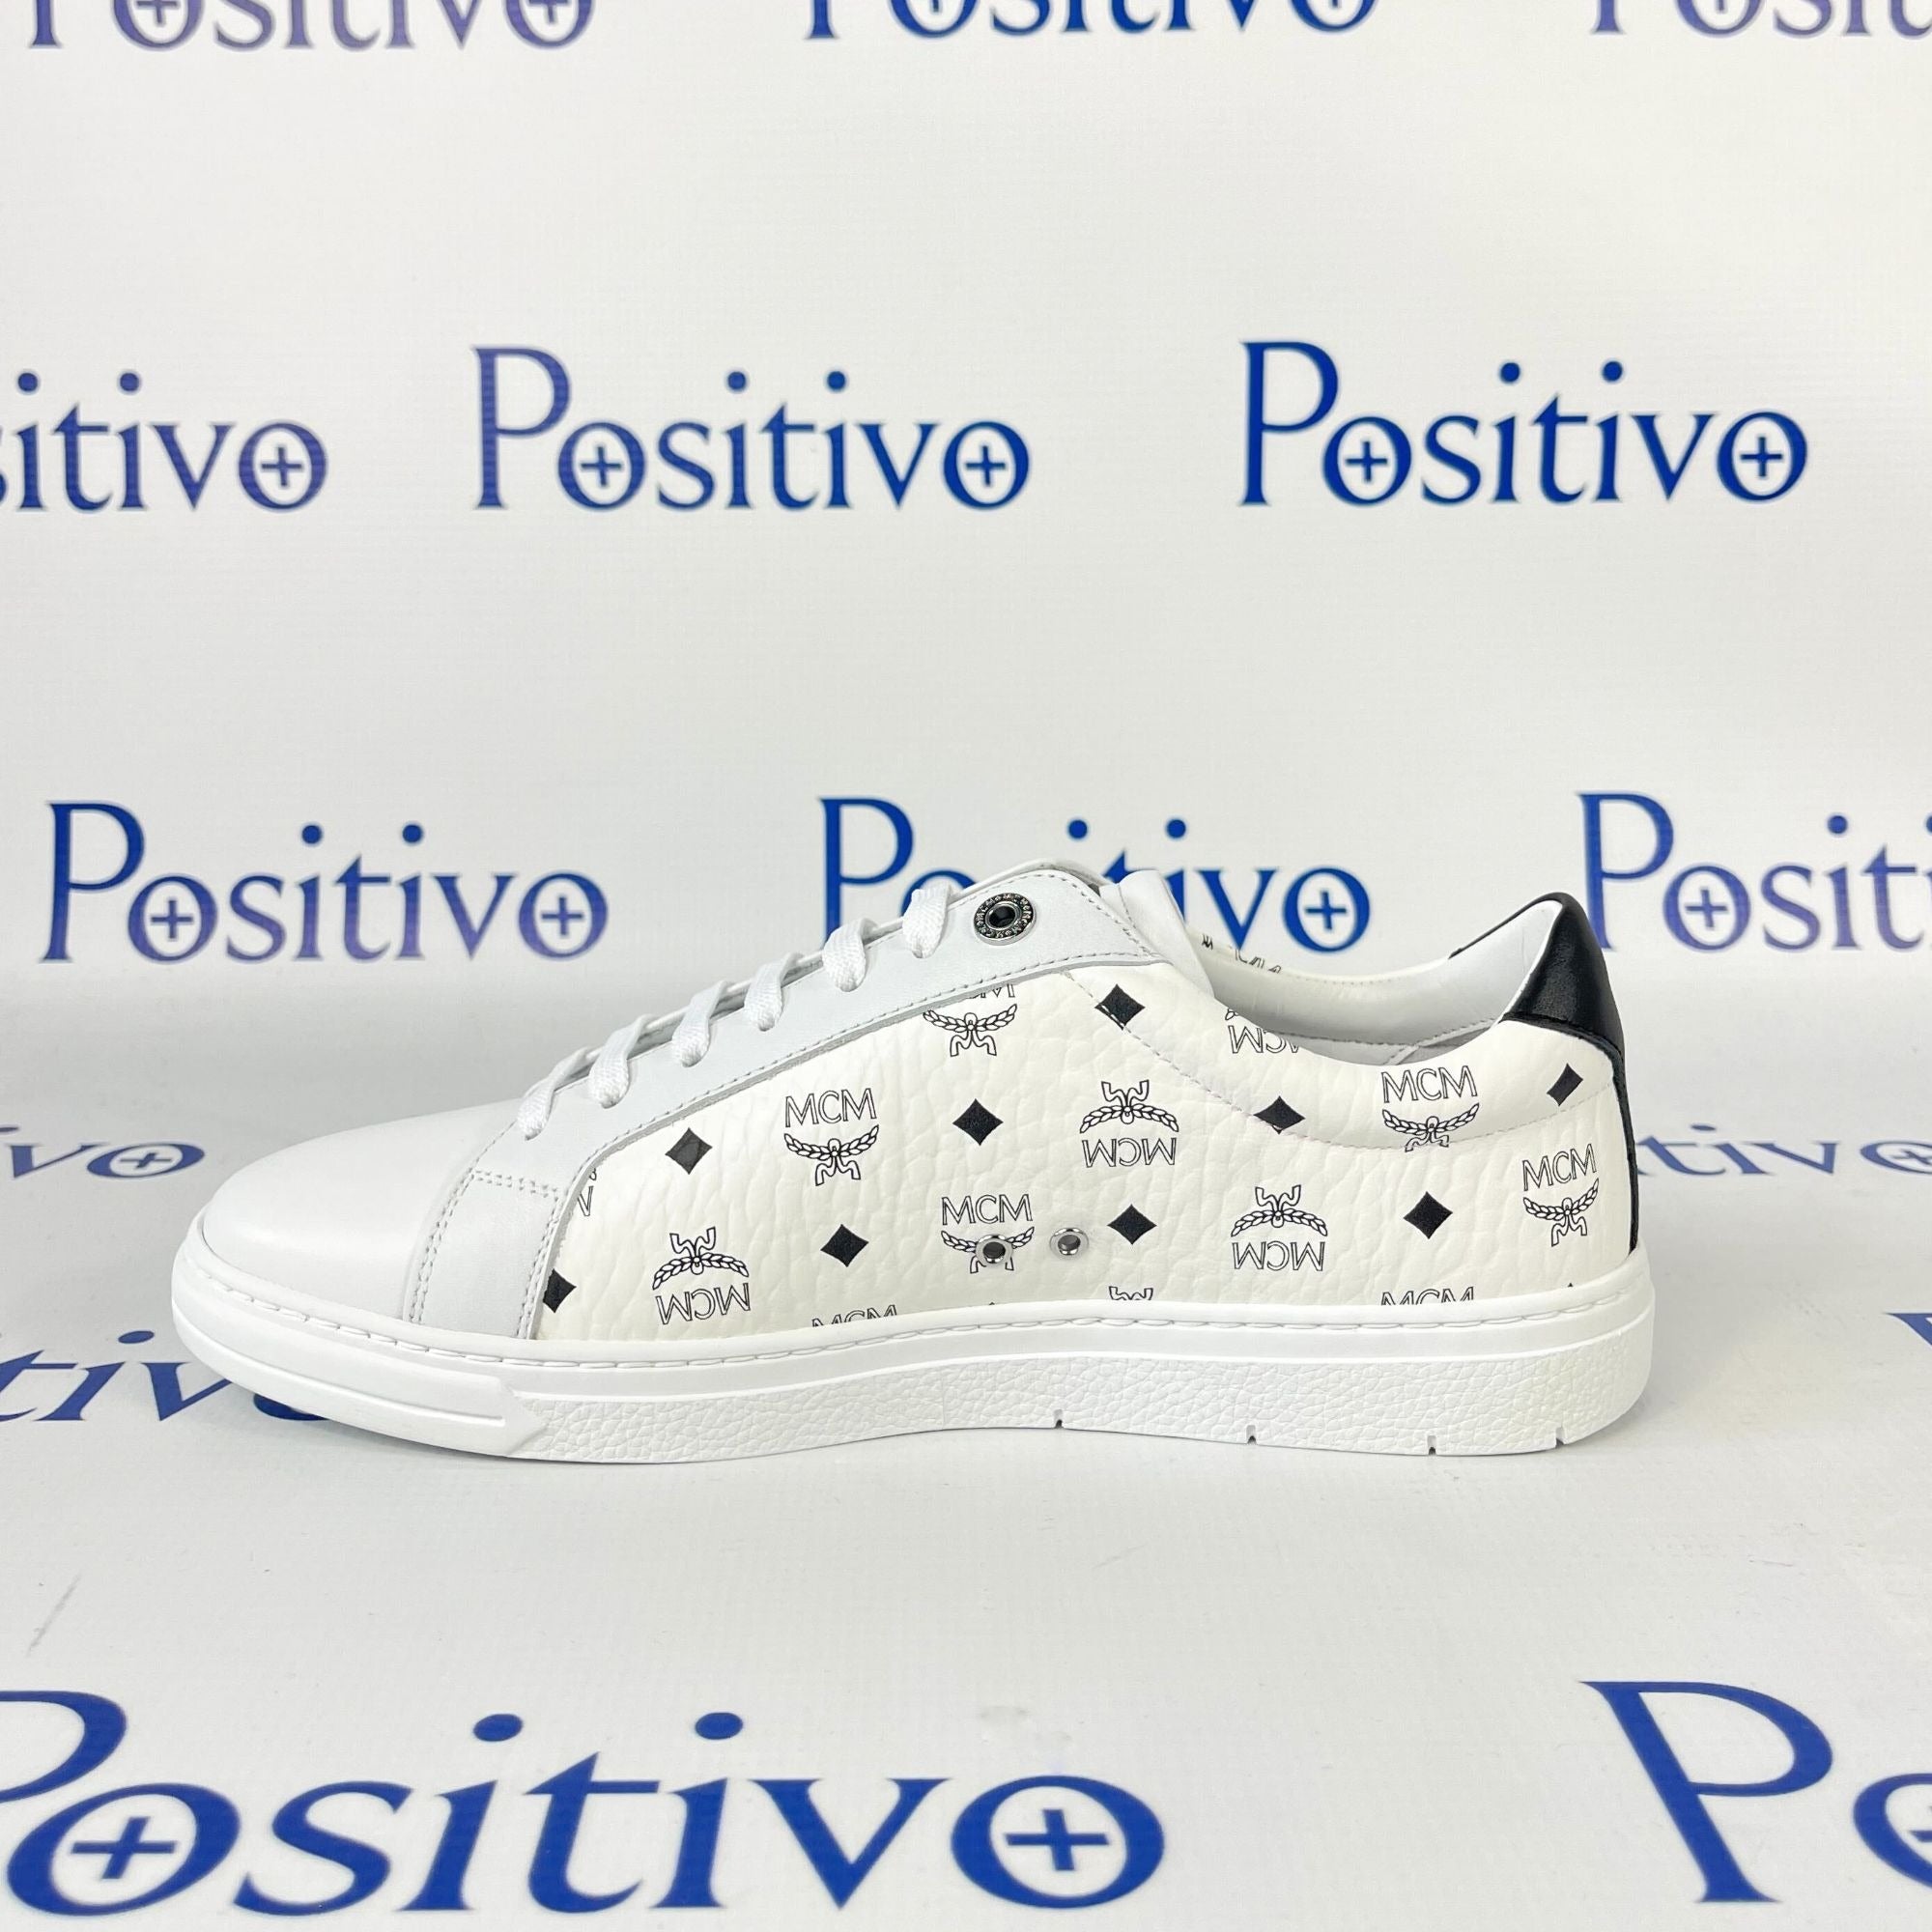 MCM Terrain Derby Visetos White Leather Low Top Sneakers | Positivo Clothing